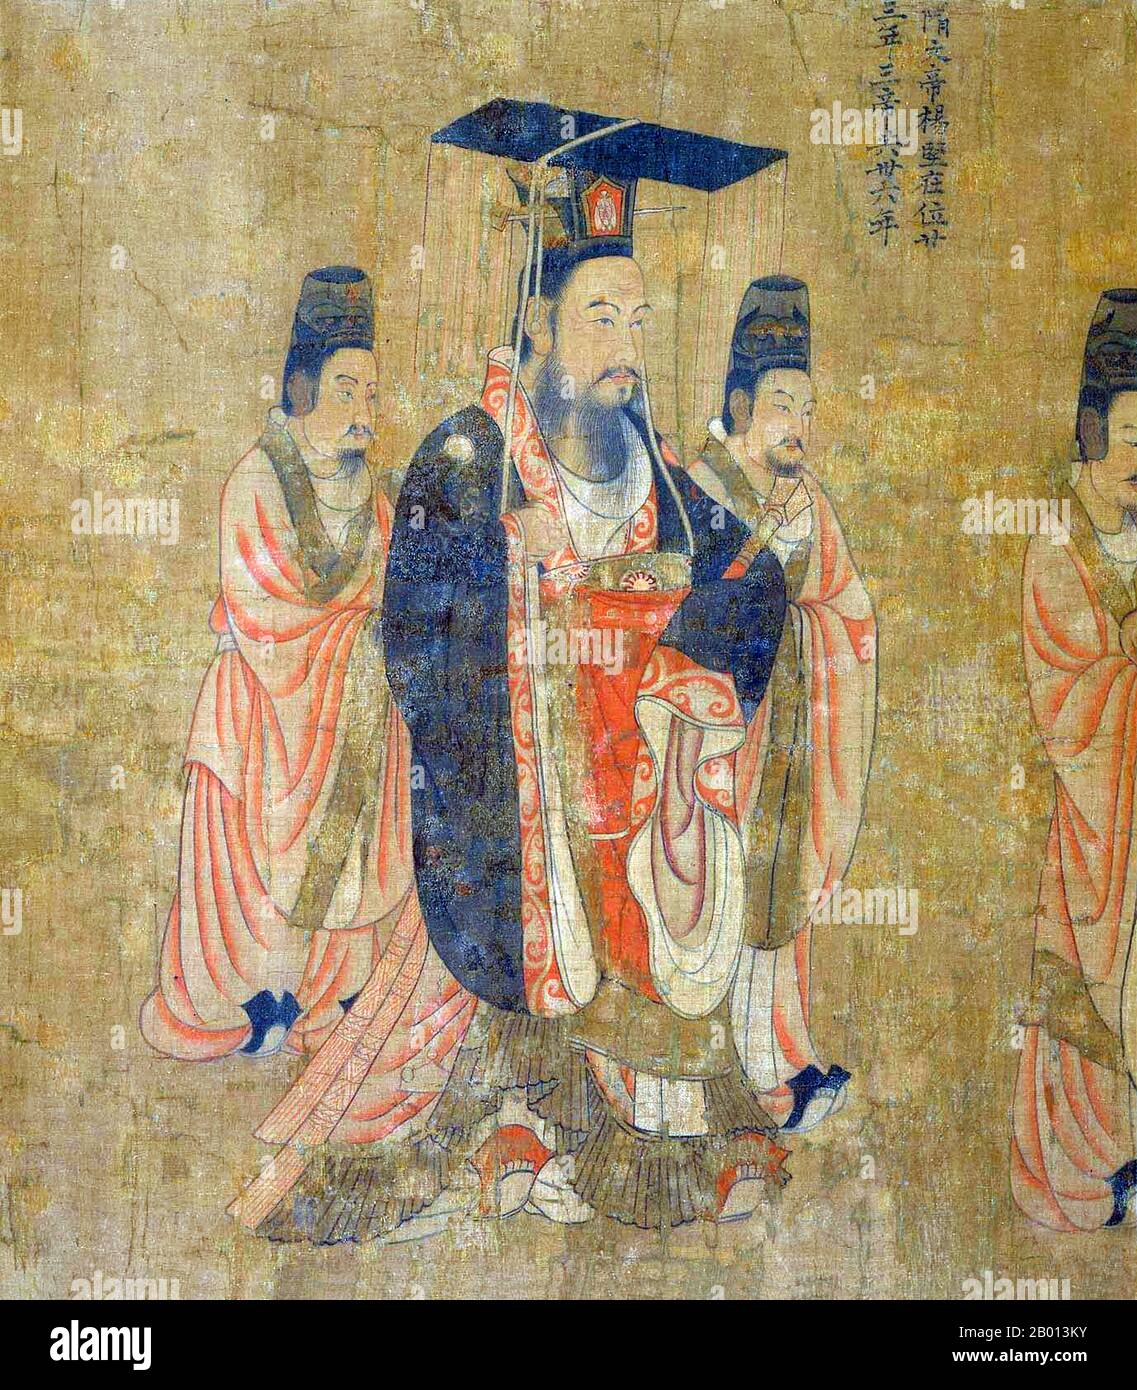 China: Emperor Wen of Sui (541–604). Handscroll painting from the 'Thirteen Emperors Scroll' by Tang Dynasty court painter Yan Liben (600-673), 7th century.  Emperor Wen of Sui, personal name Yang Jian, Xianbei name Puliuru Jia and nickname Naluoyan, was the founder and first emperor of China's Sui Dynasty. He was a hard-working administrator. As a Buddhist, he encouraged the spread of Buddhism through the state. Stock Photo